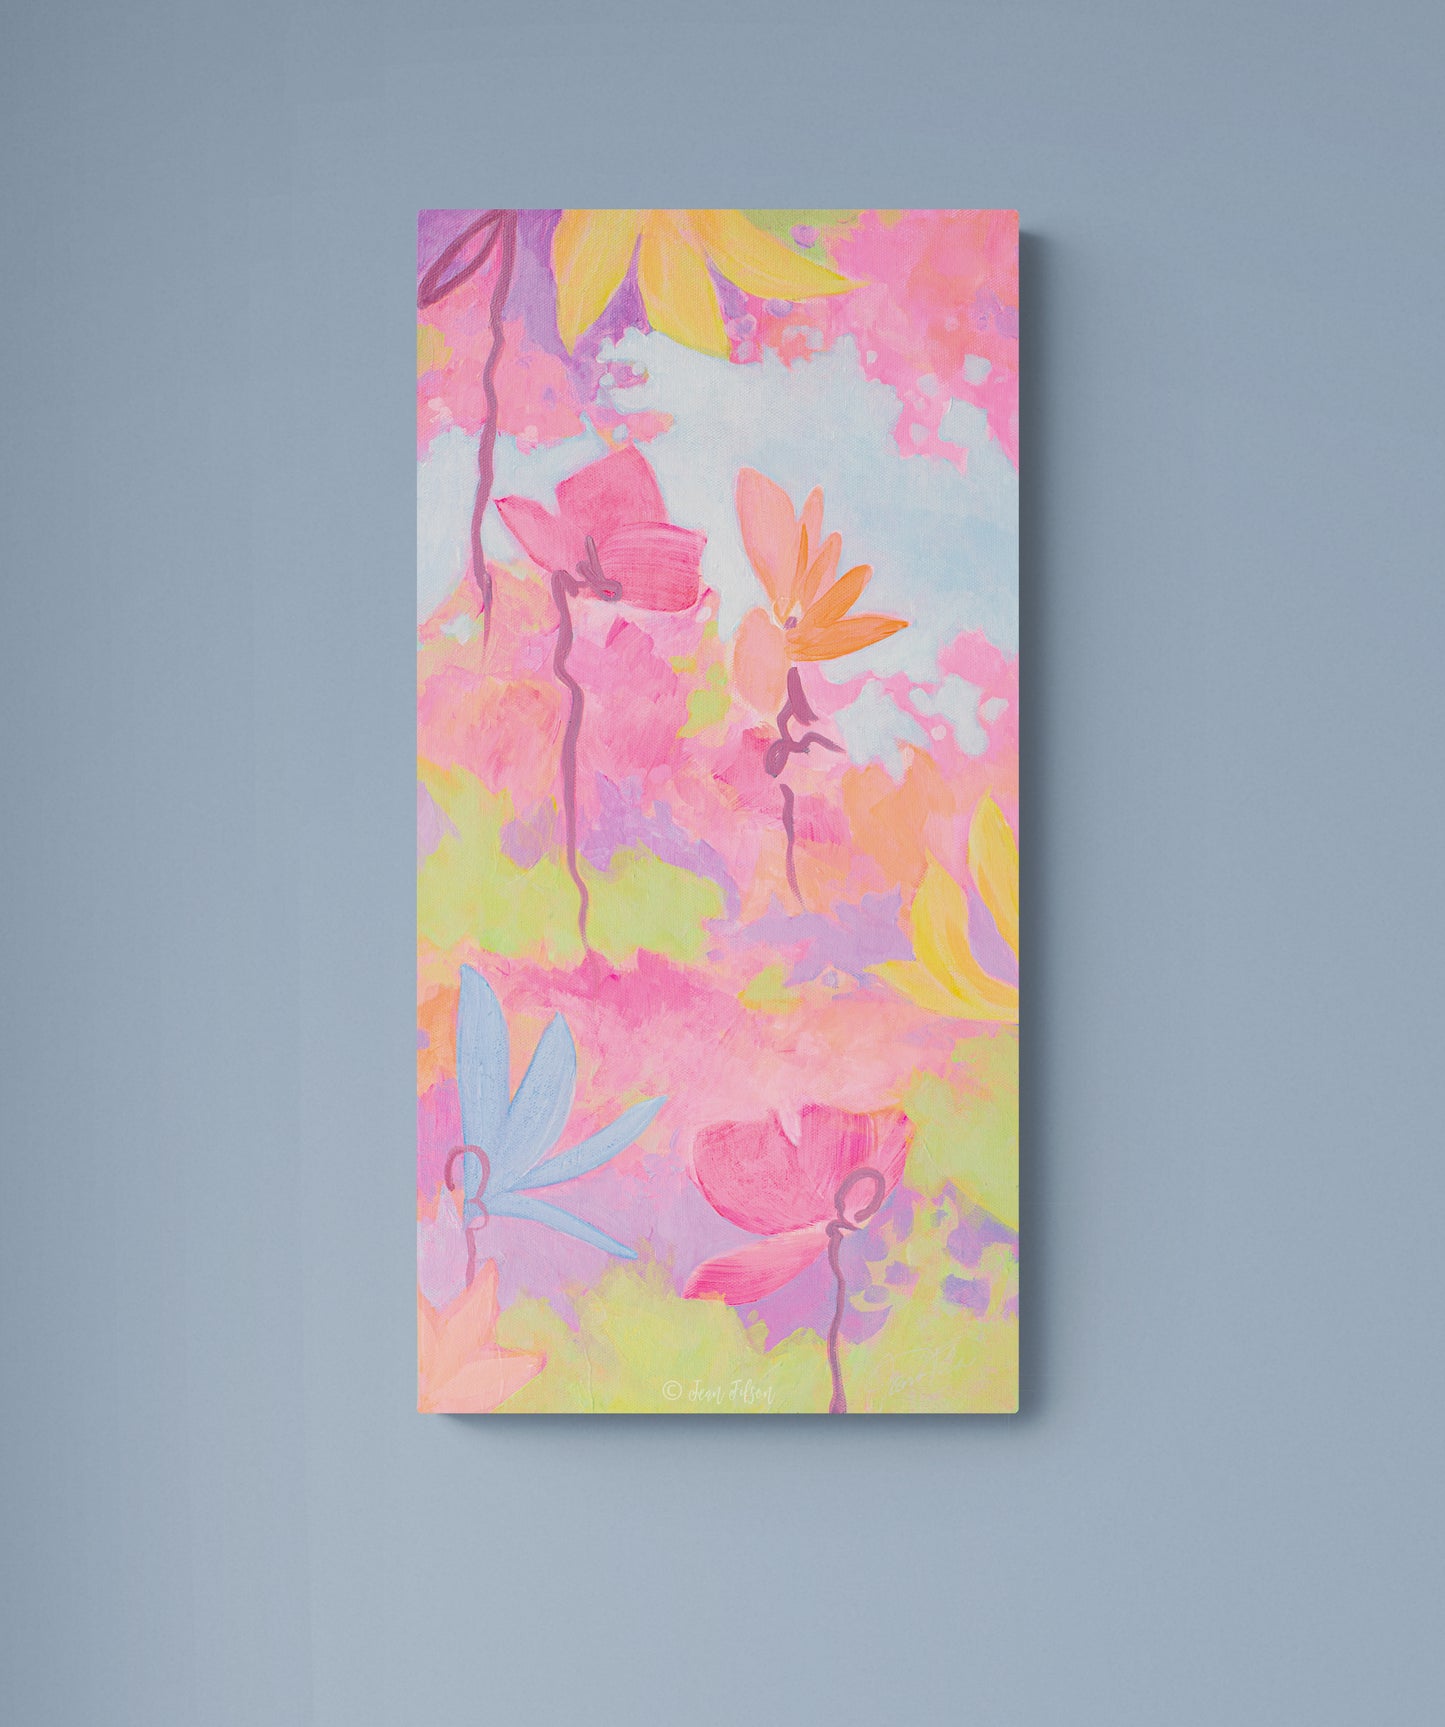 GARDEN PINK 1&2, Set of 2 Original abstract canvas painting for sale, Abstract Art floral, pink